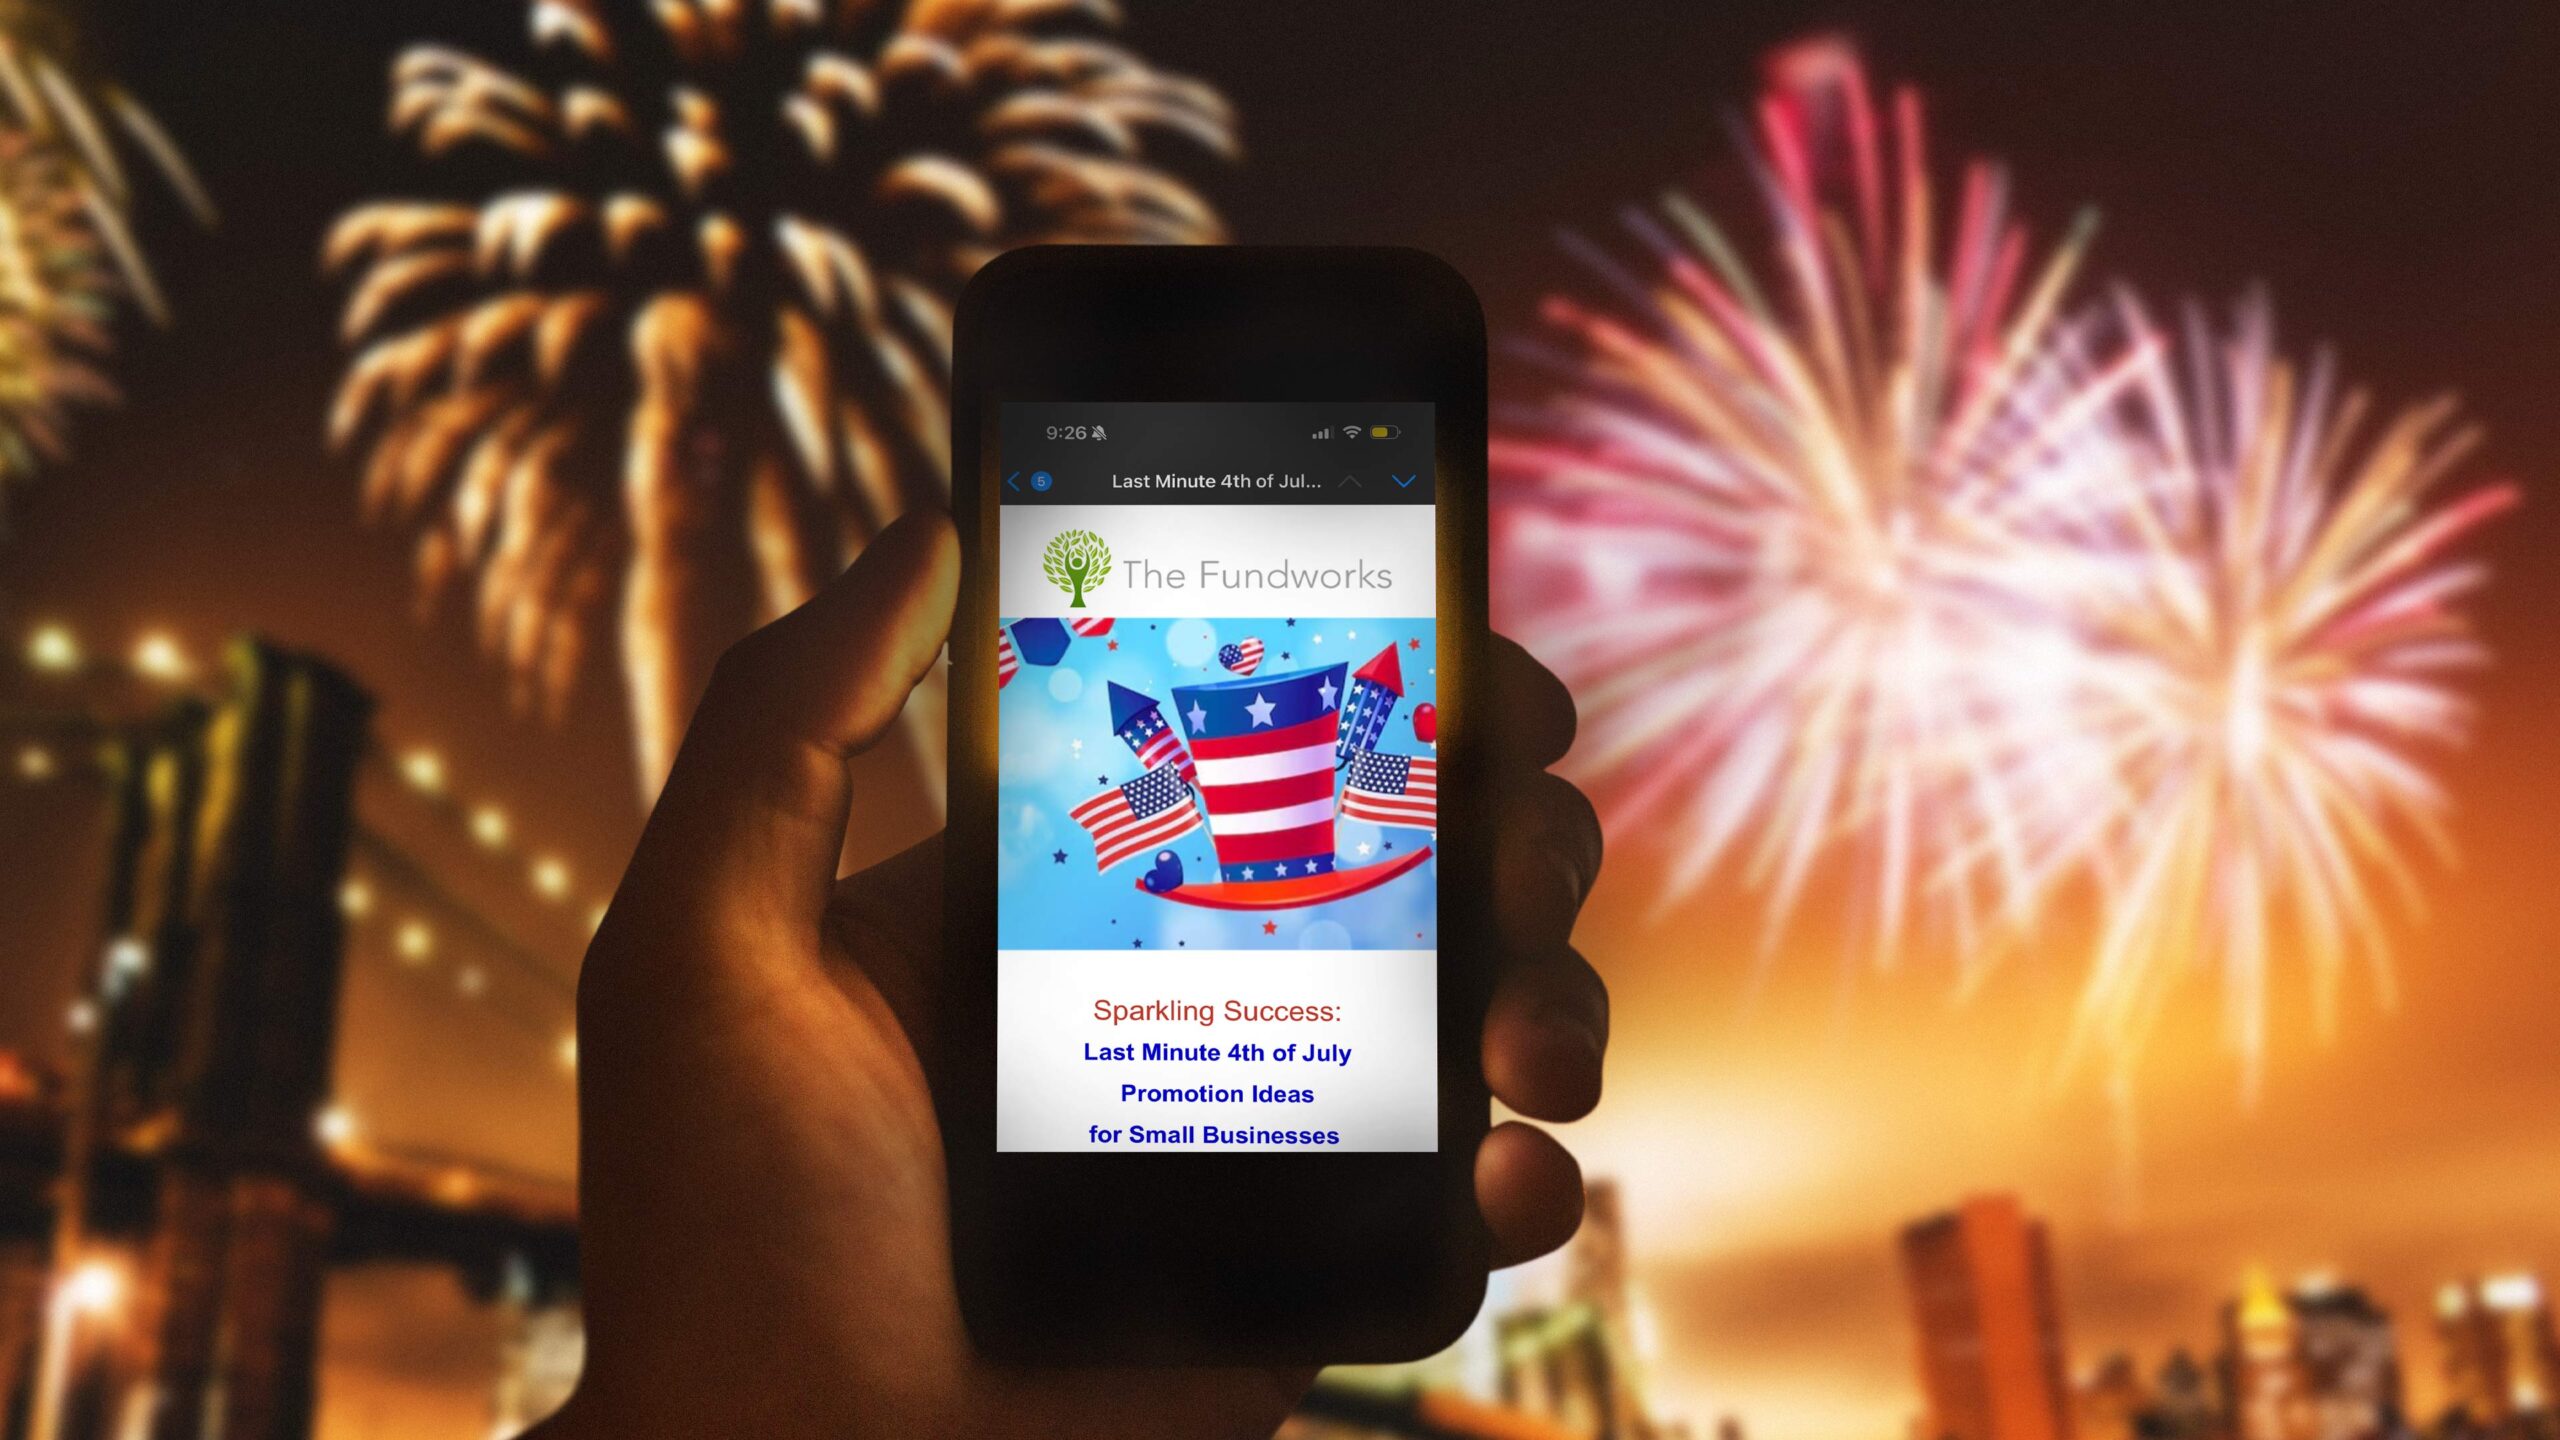 Featured image for “Sparkling Success: Last Minute 4th of July Promotion Ideas for Small Businesses”